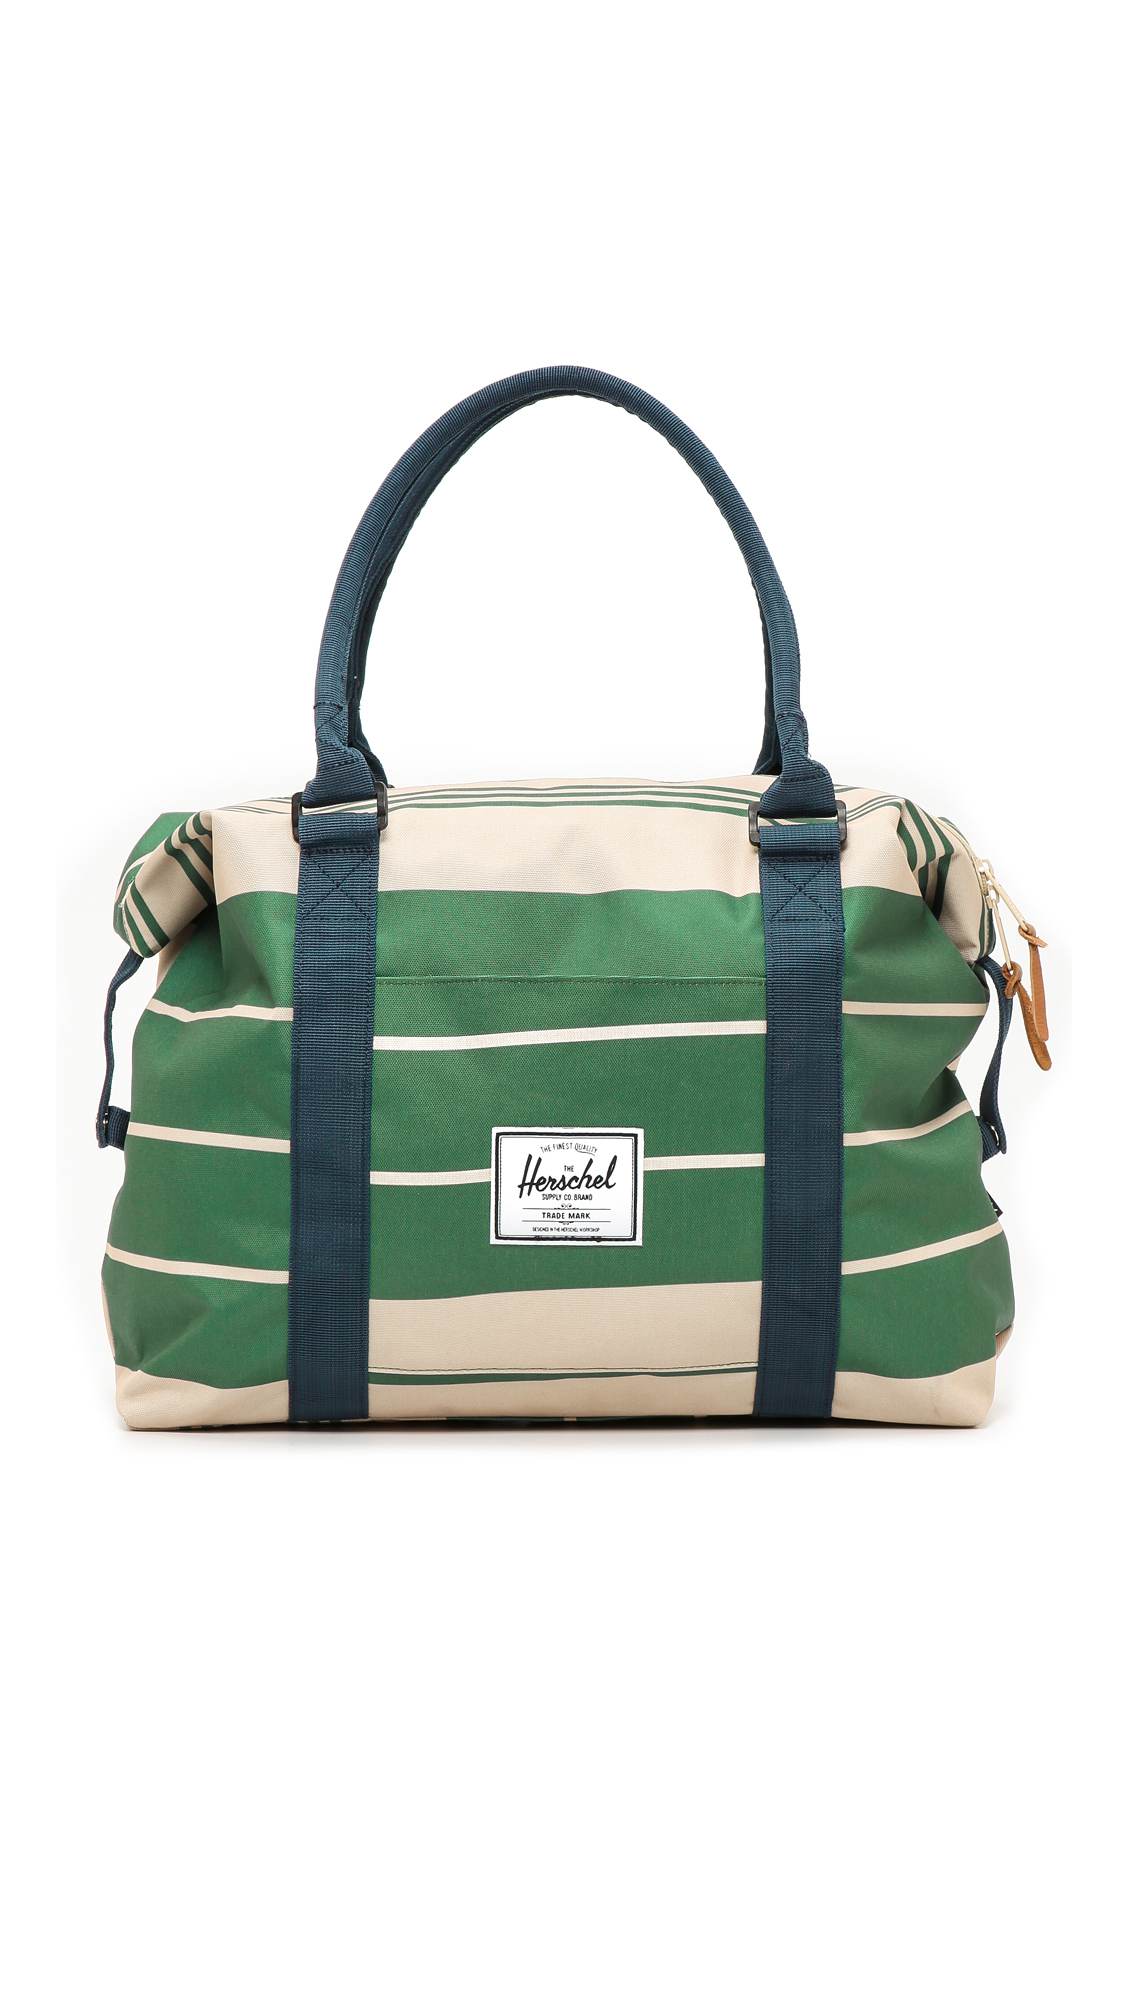 Lyst - Herschel Supply Co. Strand Duffel Bag Army Stripe and Navy in Green